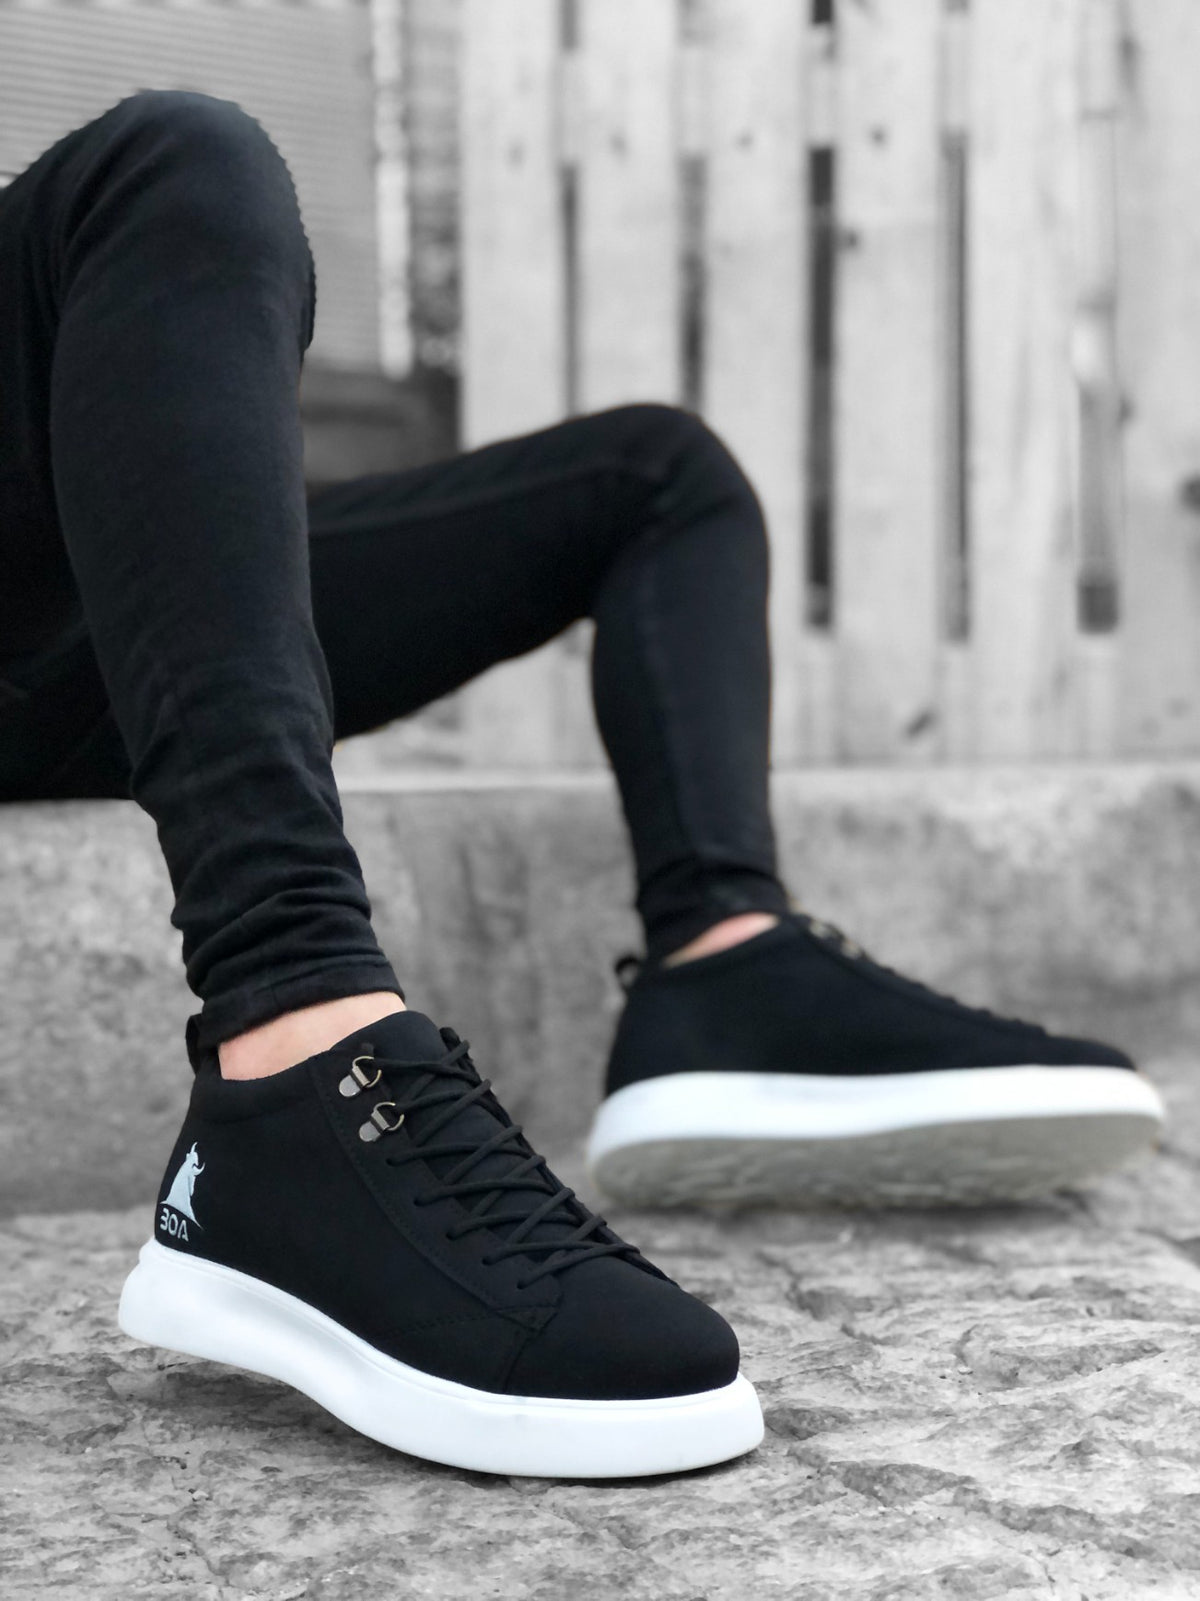 BA0220 Lace-up Men's High Sole Black White Sole Sports Shoes sneakers - STREETMODE™